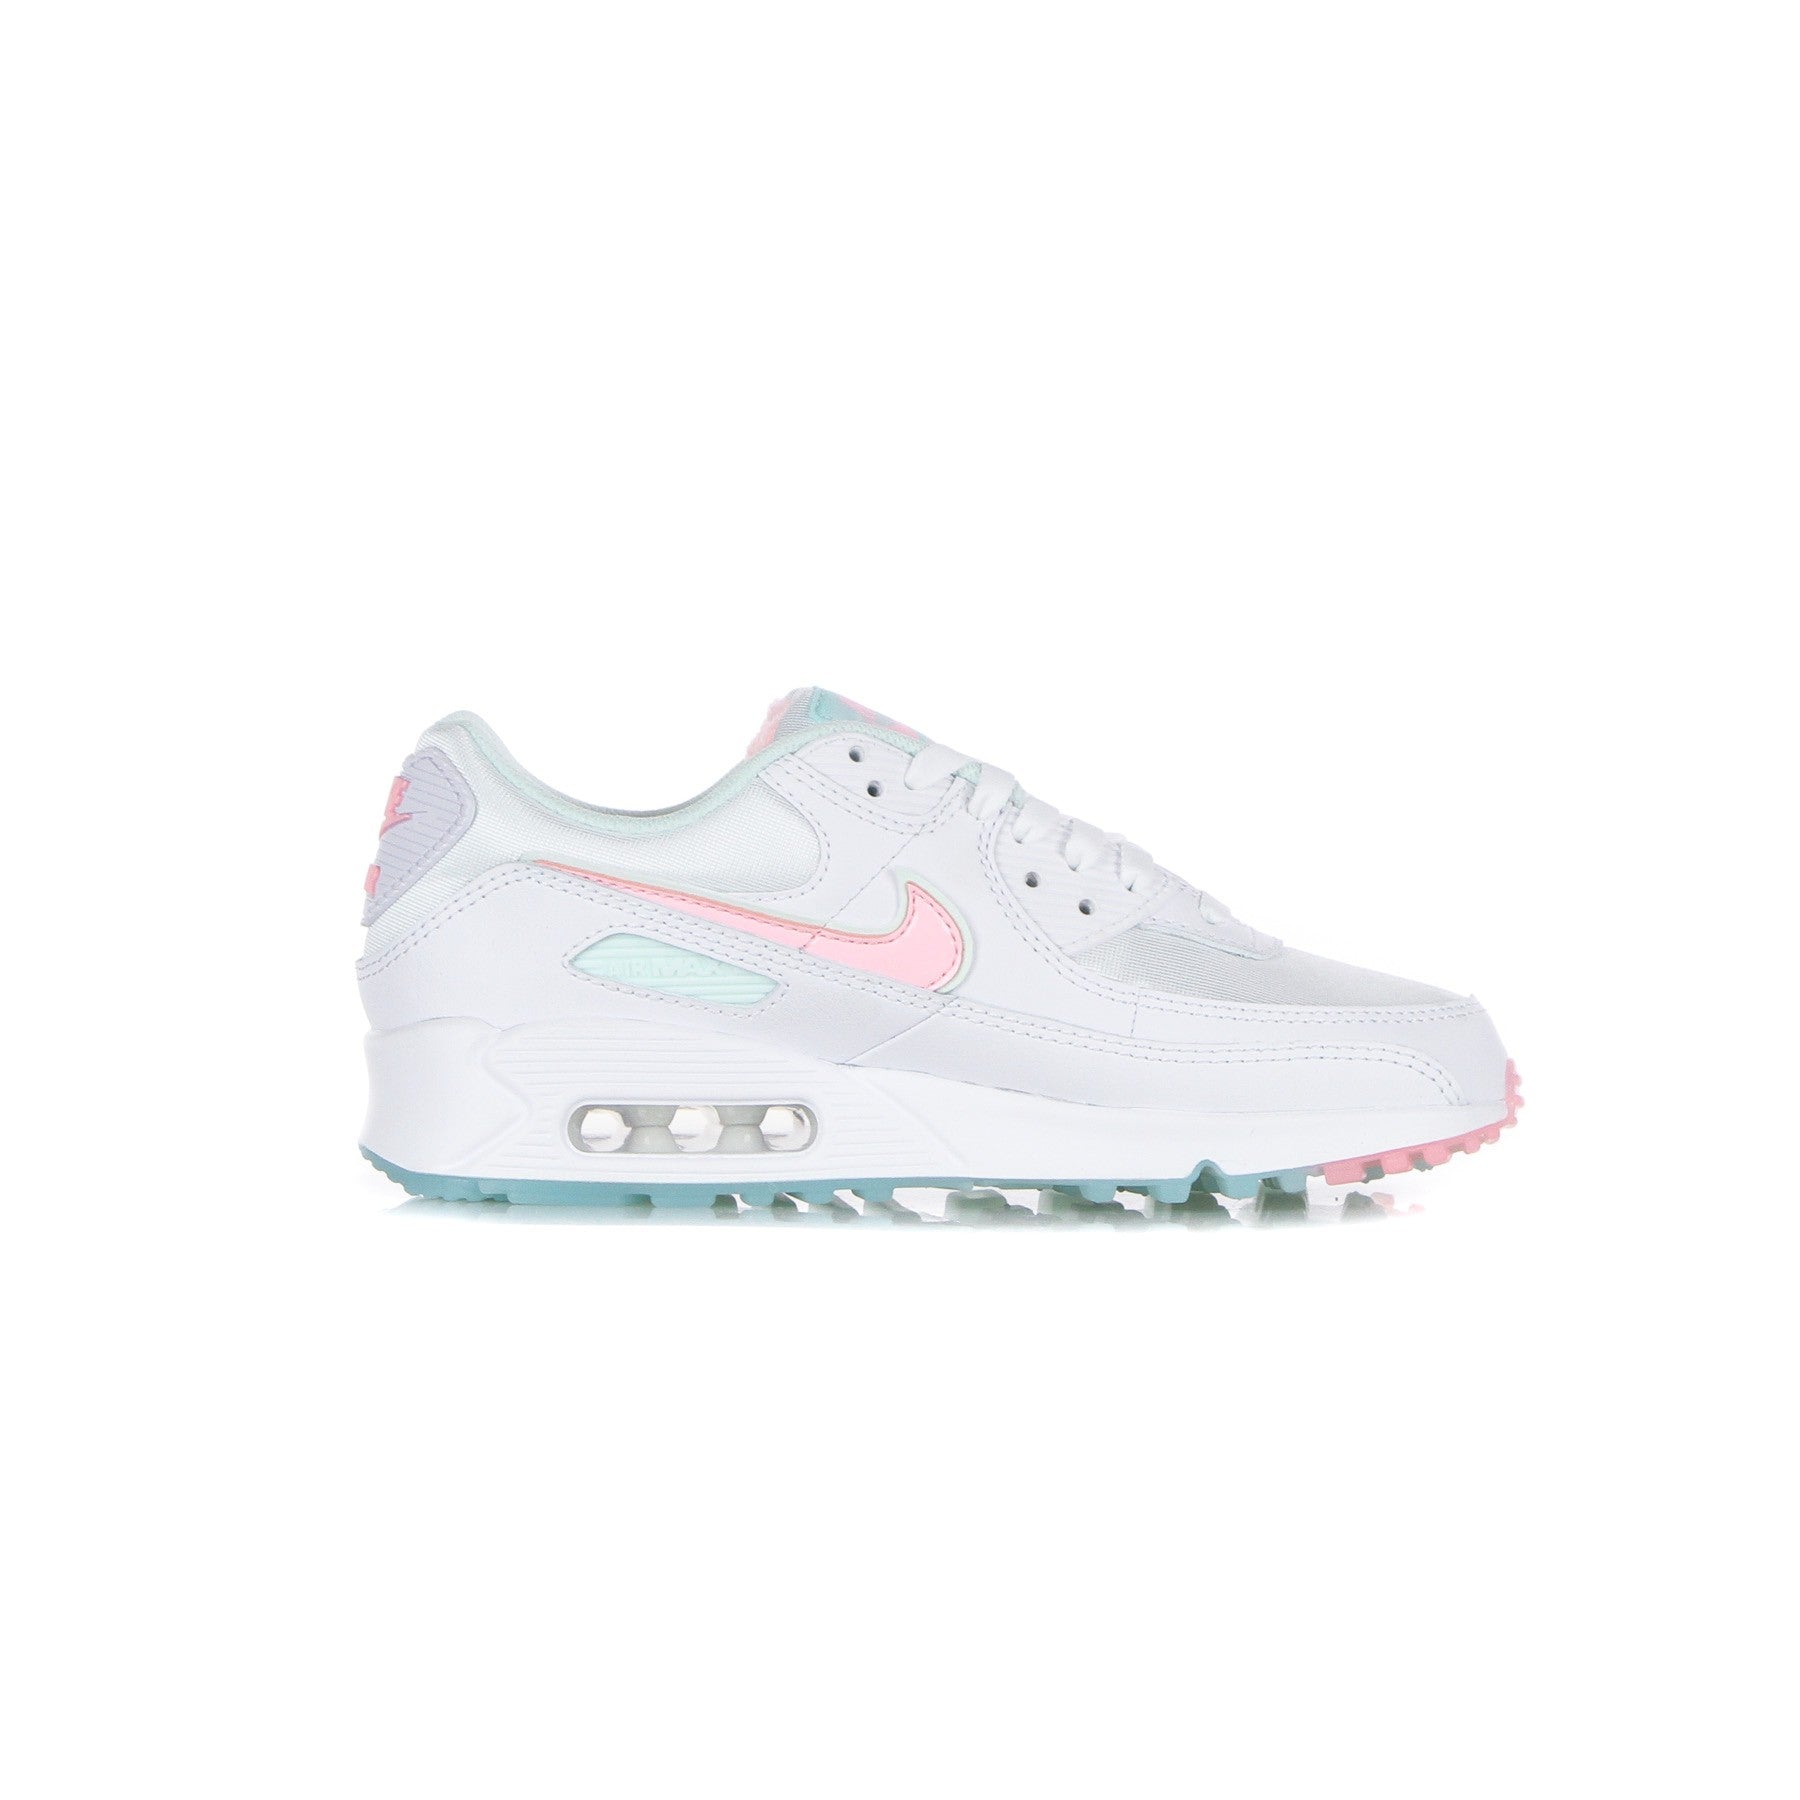 W Air Max 90 White/arctic Punch/barely Green Women's Low Shoe